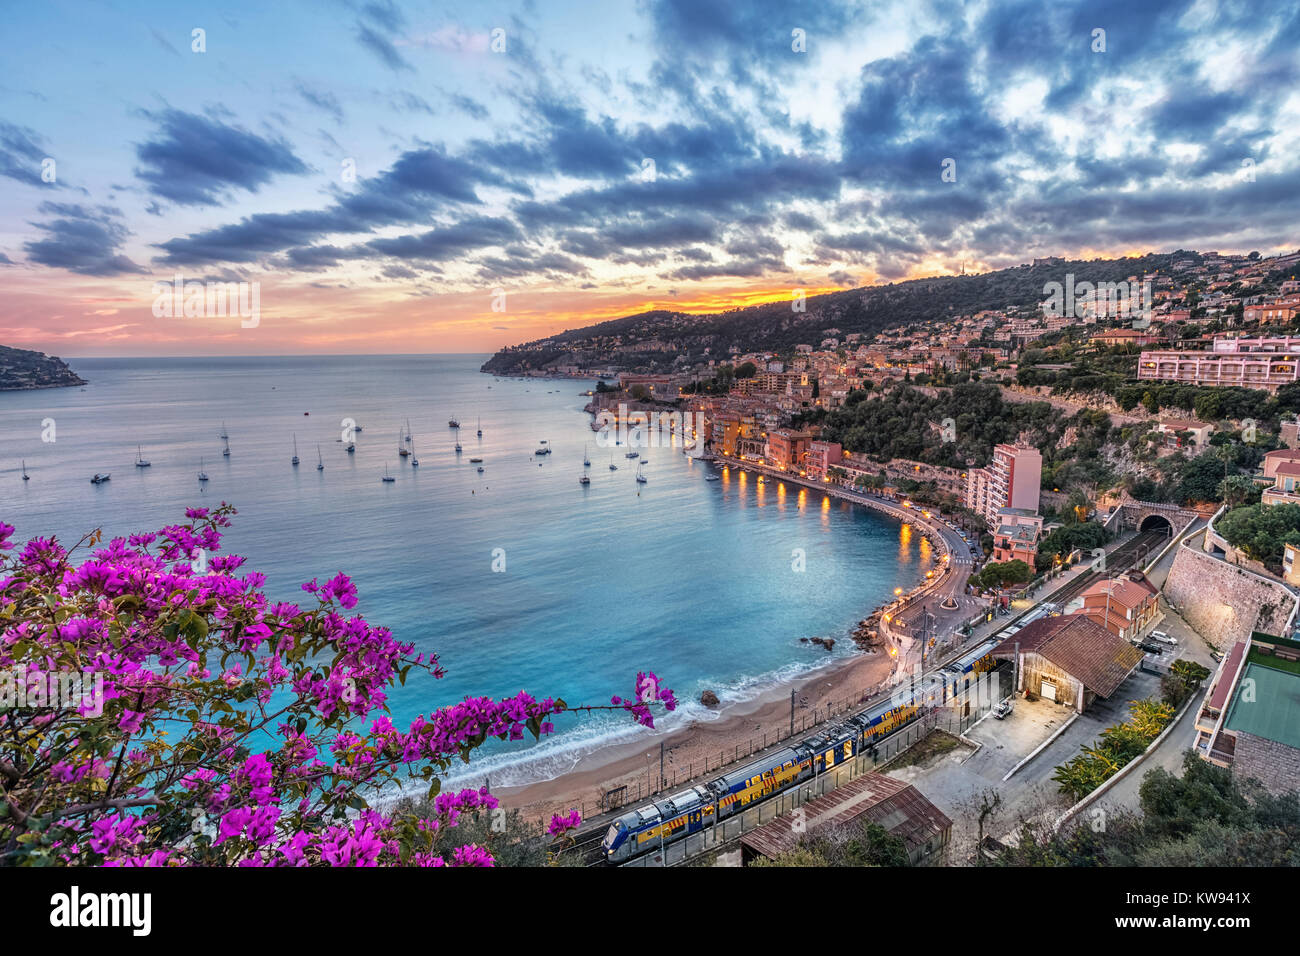 Aerial view of Villefranche-sur-Mer and the bay of Villefranche on